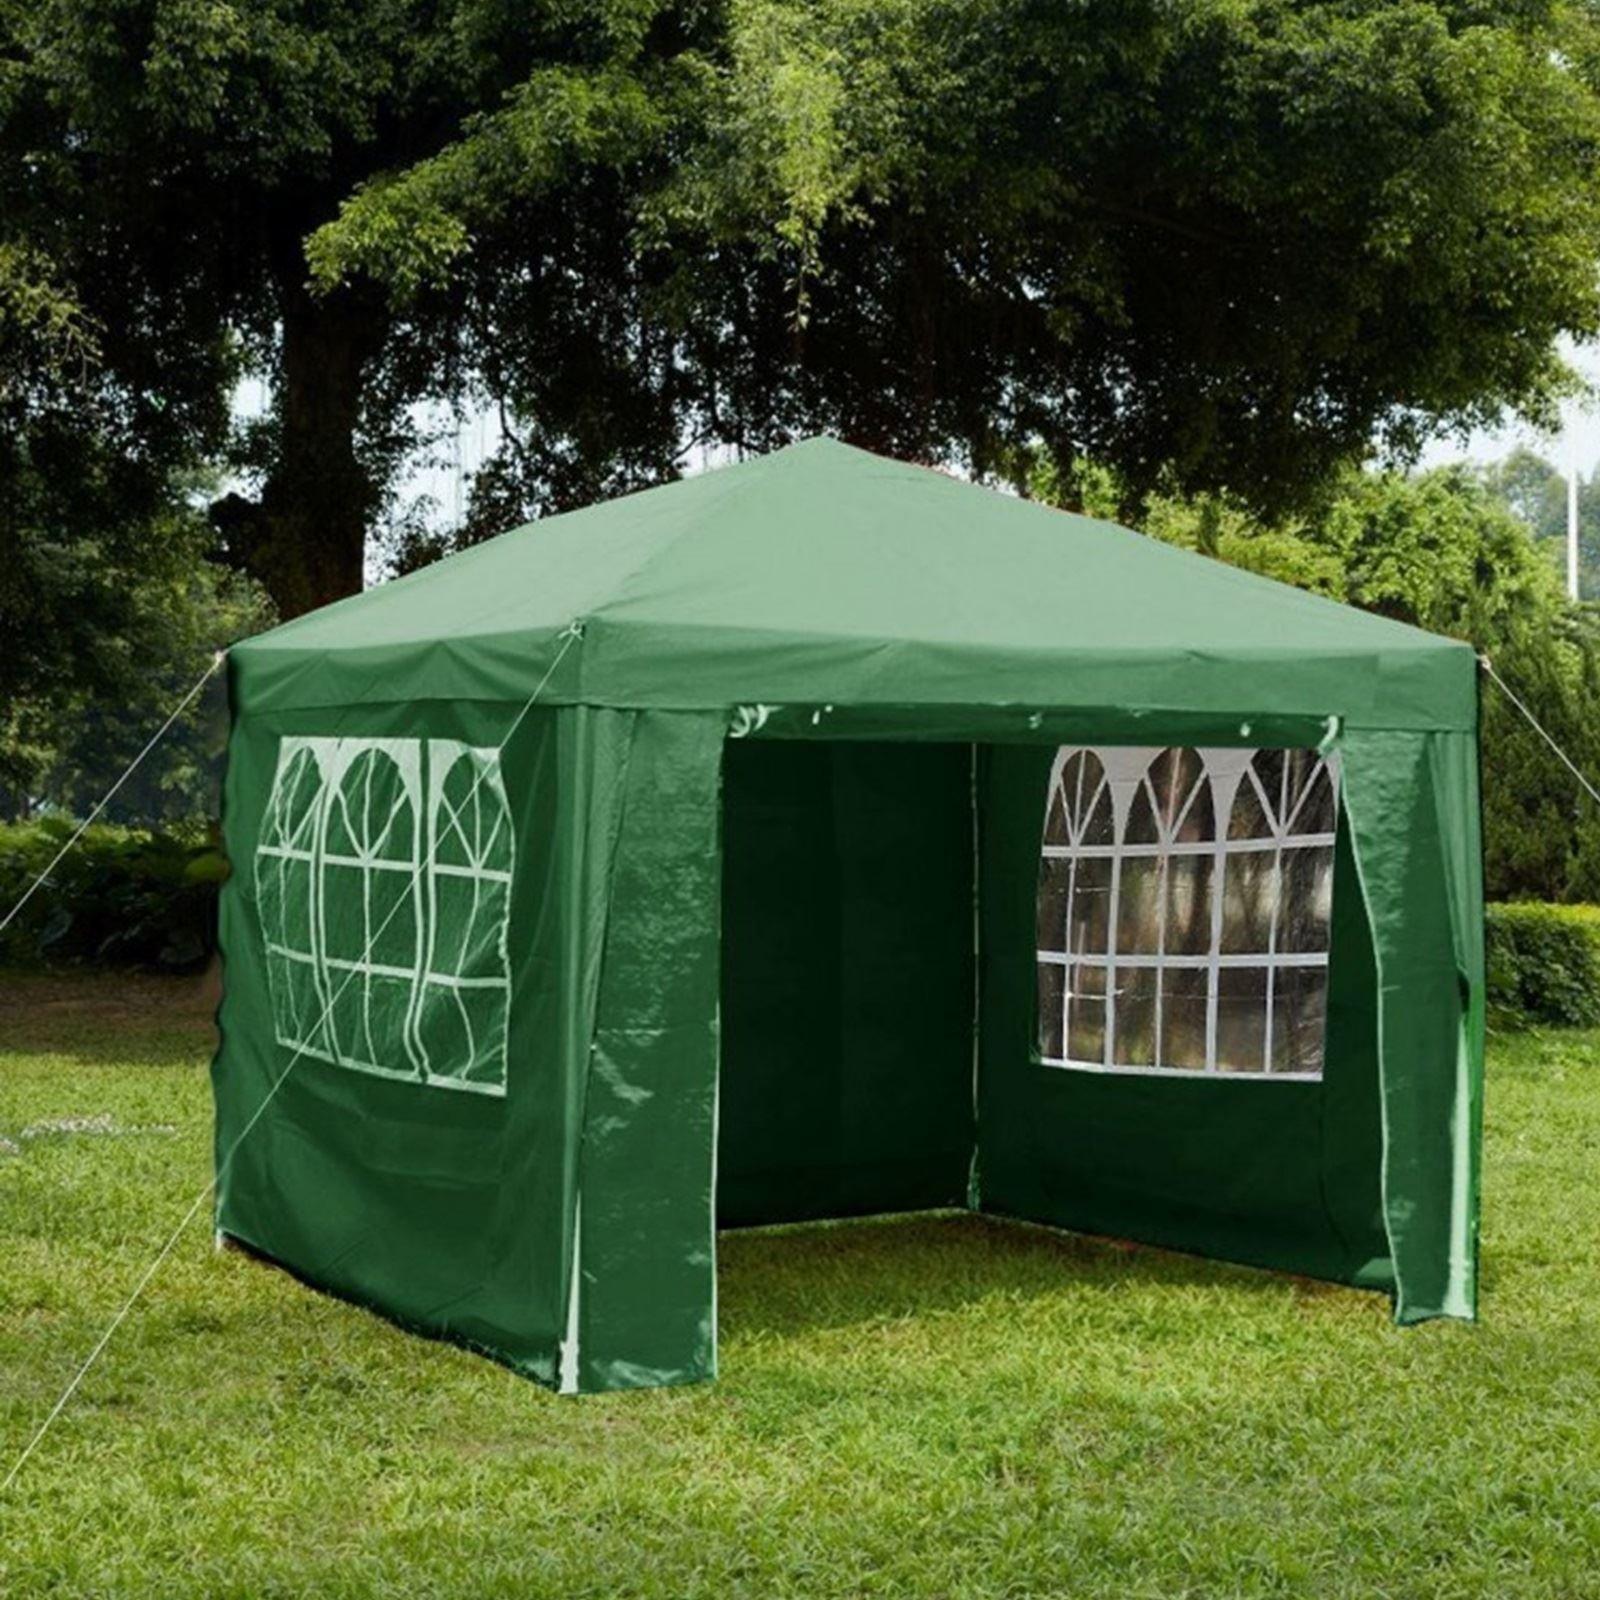 Gr8 Garden (Green) Gazebo With Sides 3x3m | Outdoor Party Tent